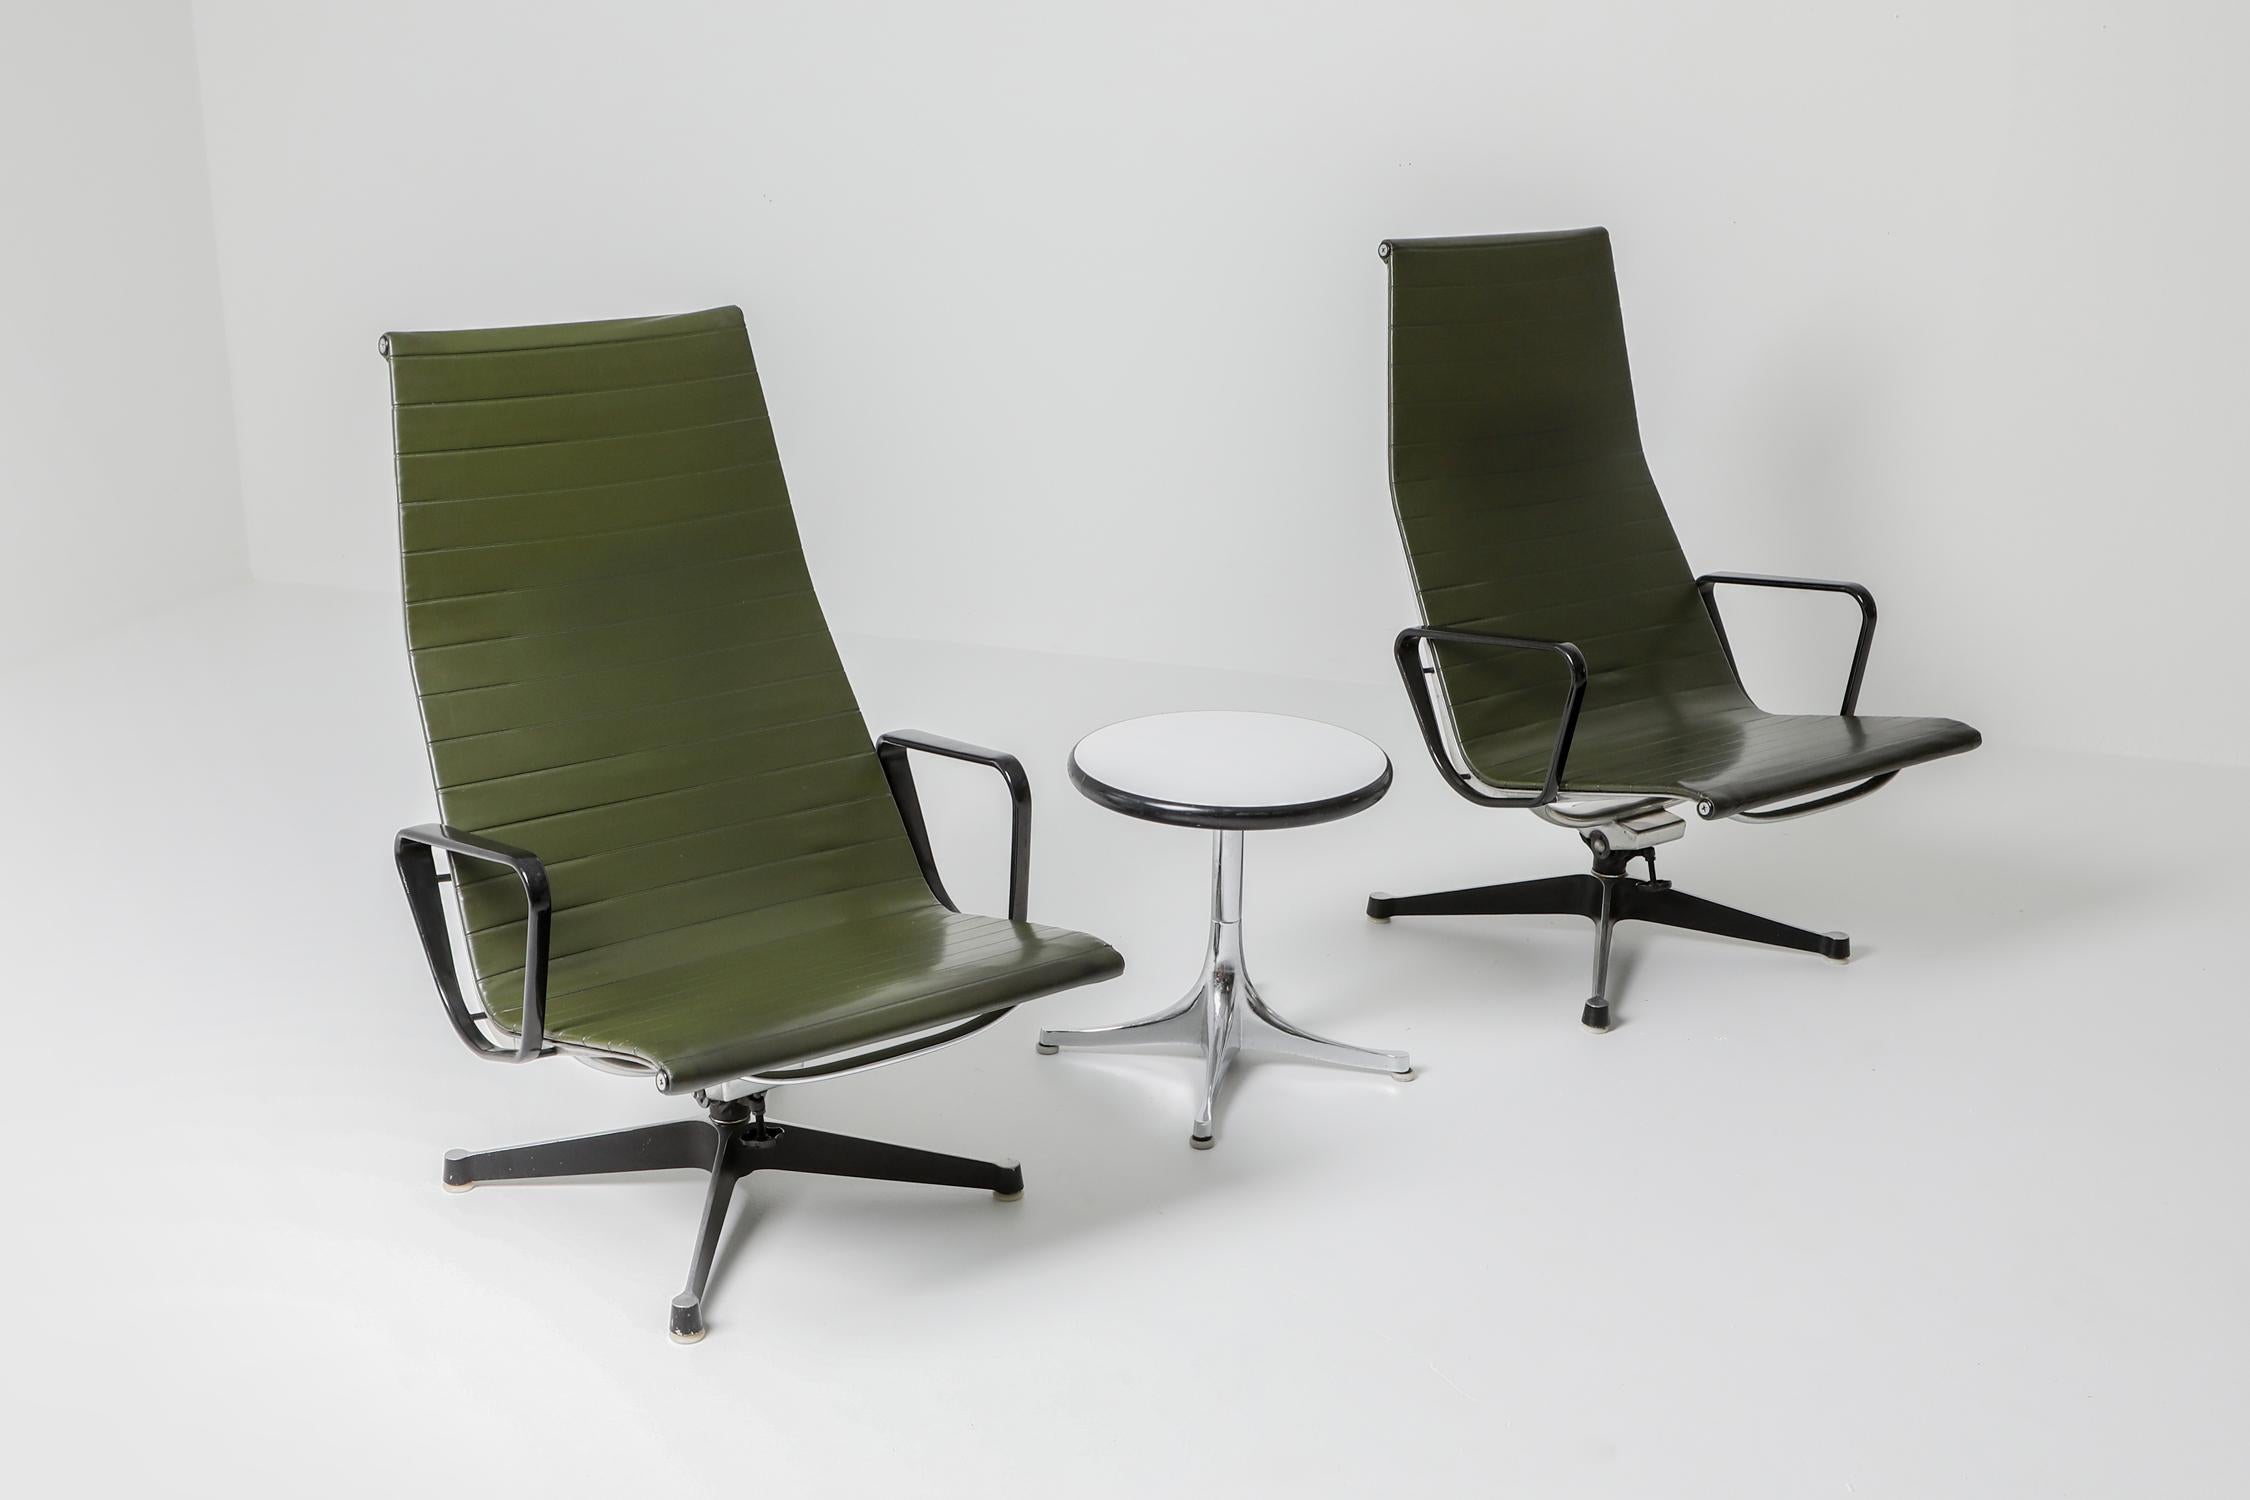 Mid-Century Modern mad men style set of two swivel lounge chairs by Charles and Ray Eames, produced by Herman Miller, USA, 1950s. A modern Classic with high backrest and adjustable tilt mechanism that offer optimal comfort. The original green